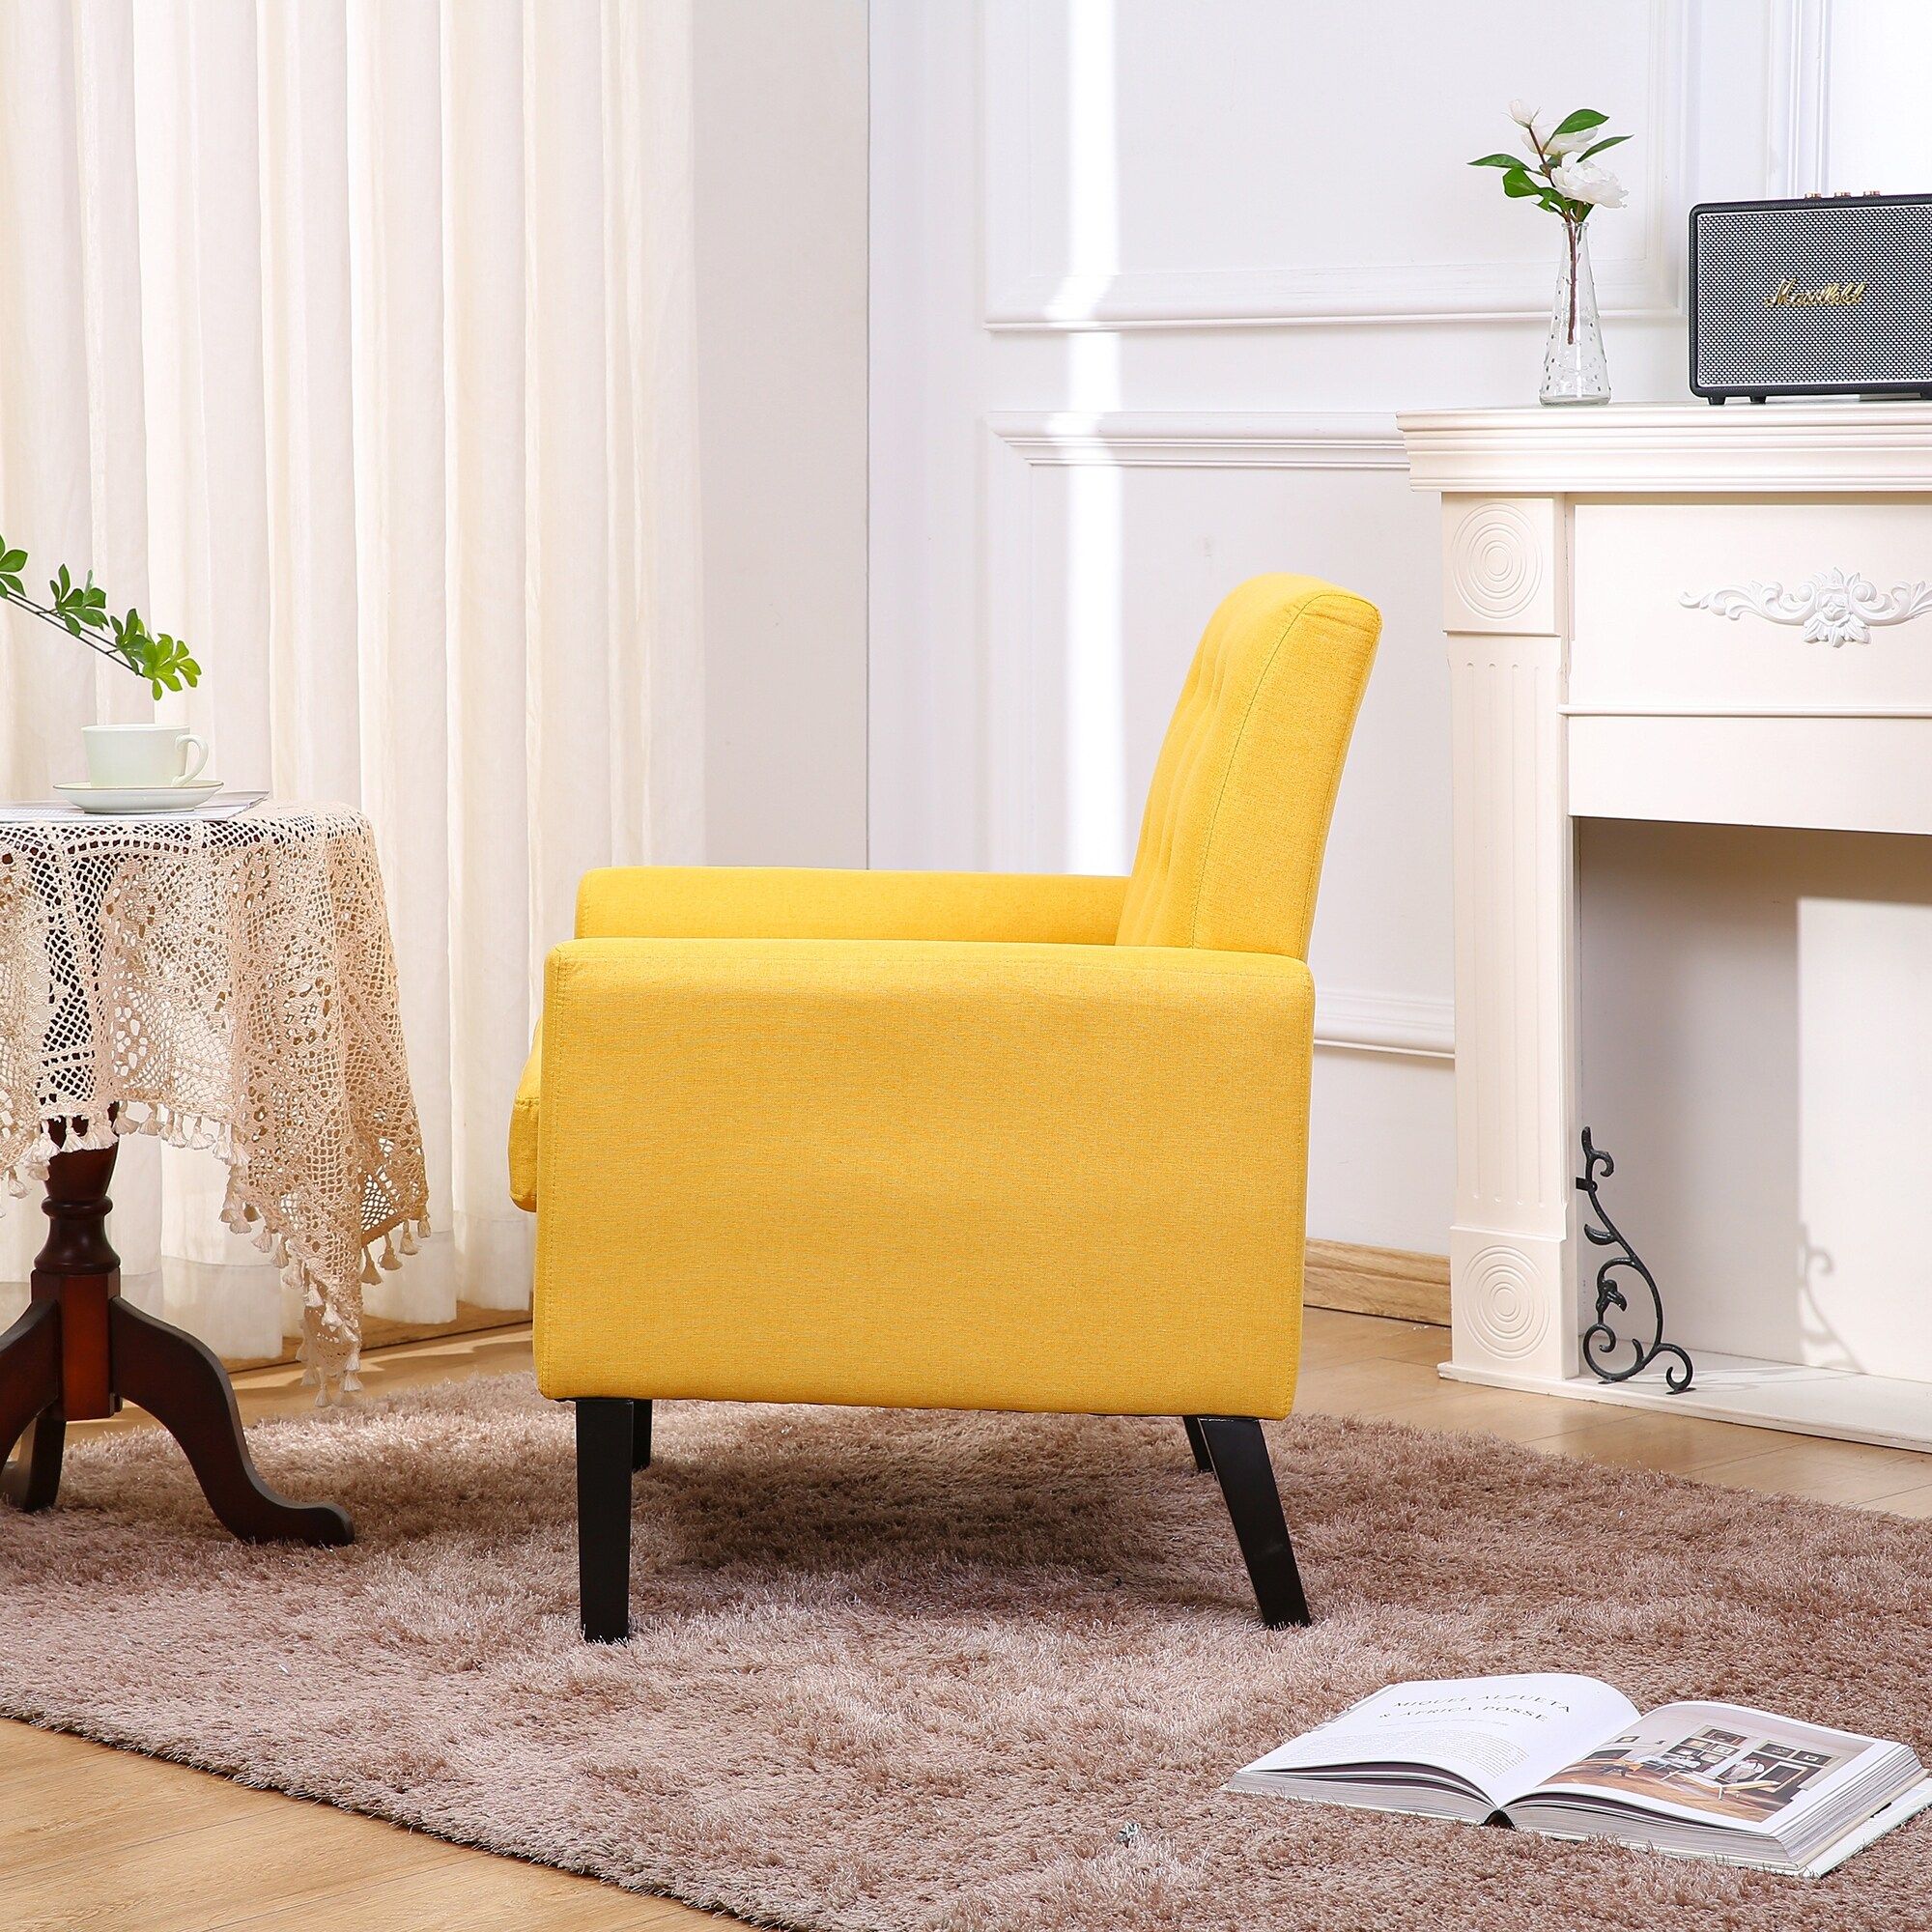 Button Tufted Upholstered Armchairs Comfy Reading Accent Chairs Sofa With  Resilient Sponge Cushions, For Living Room, Yellow – Bed Bath & Beyond –  37851148 In Comfy Reading Armchairs (View 14 of 15)